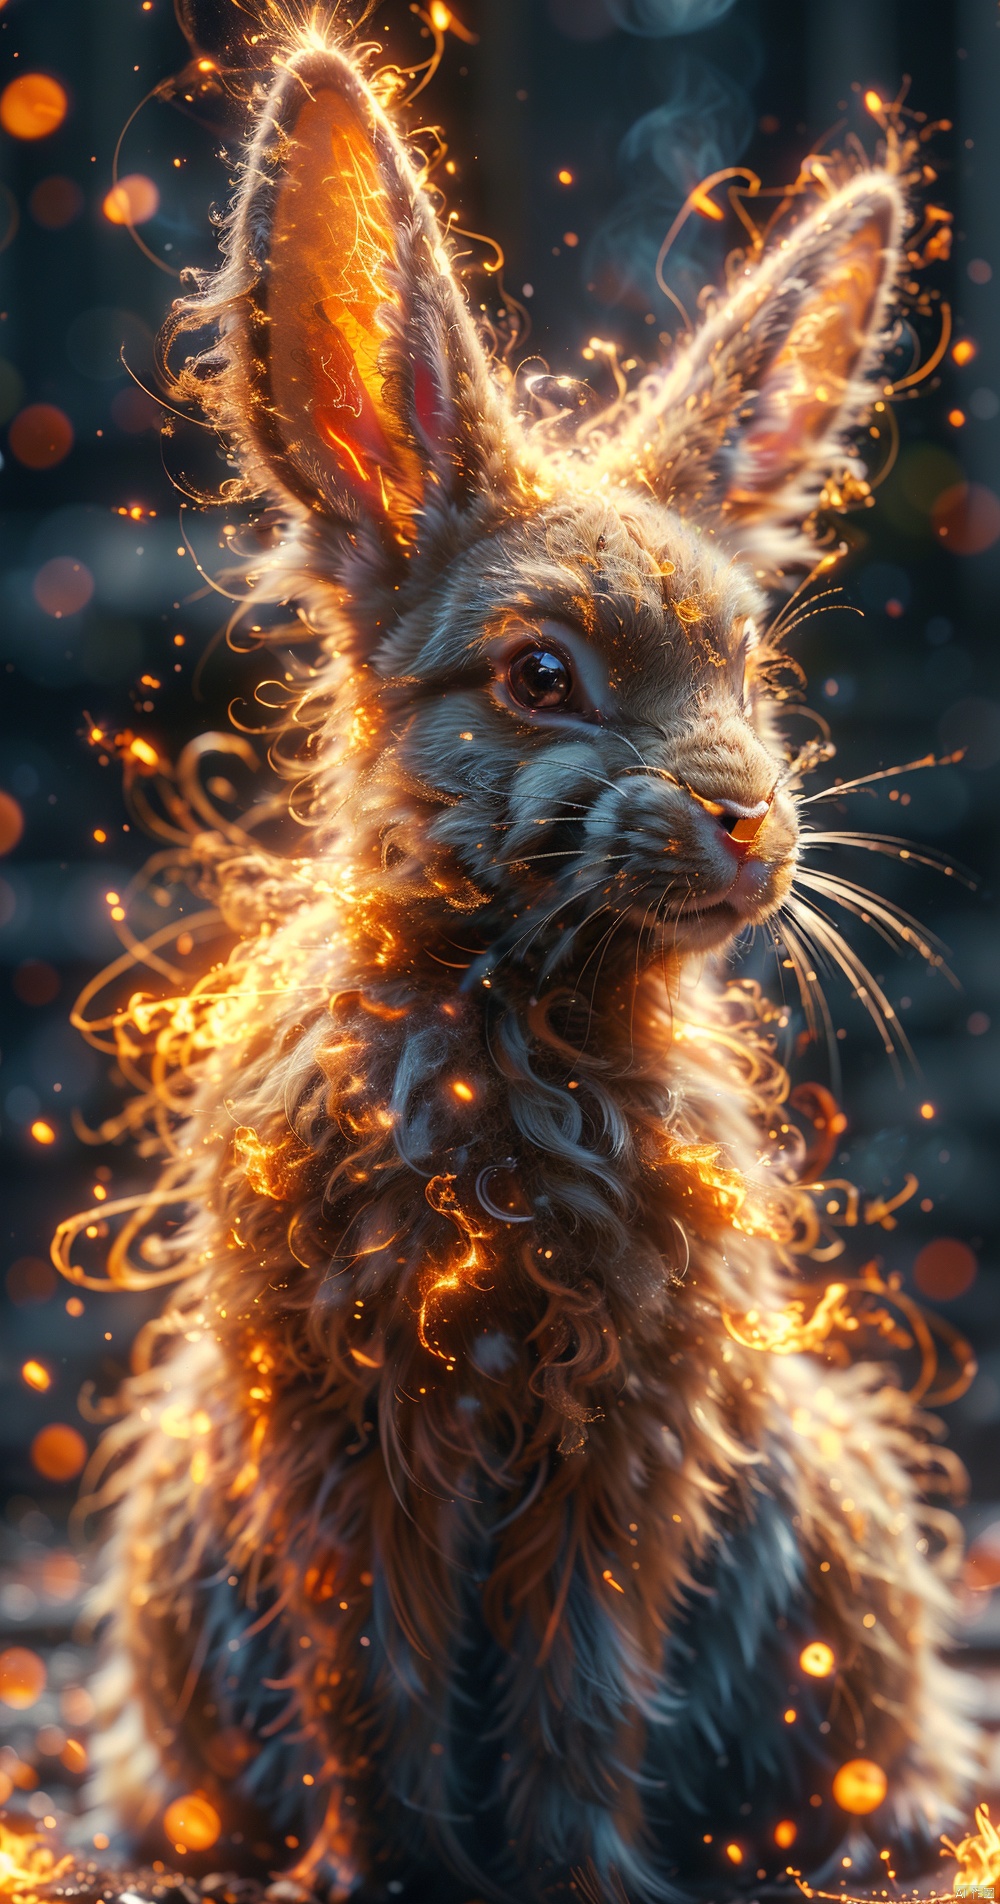  Rabbit,Crucu,The whole body,flame, burning,sparks,light particles,yinghuo,Colorful flames, blue_zhangyu, Nohumans,流光